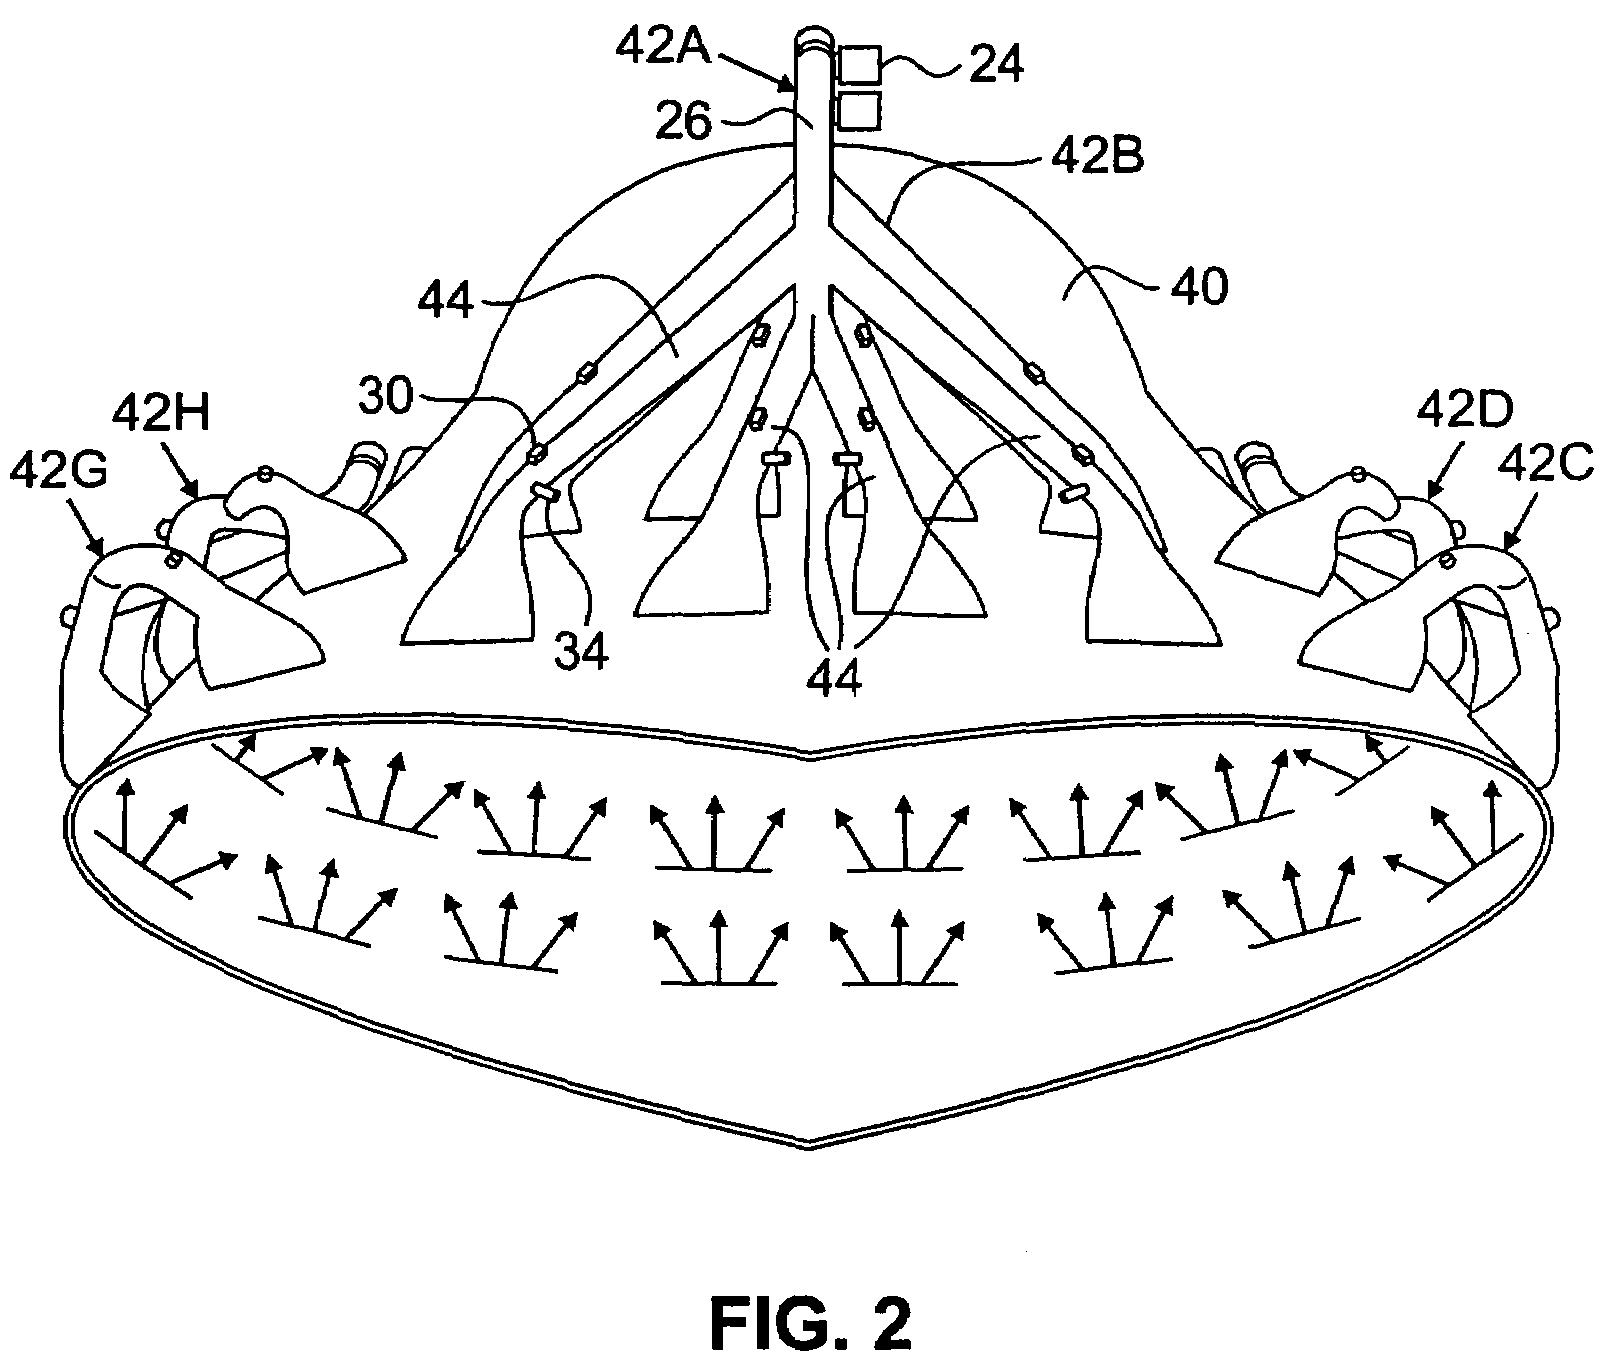 Combustion nozzle fluidic injection assembly